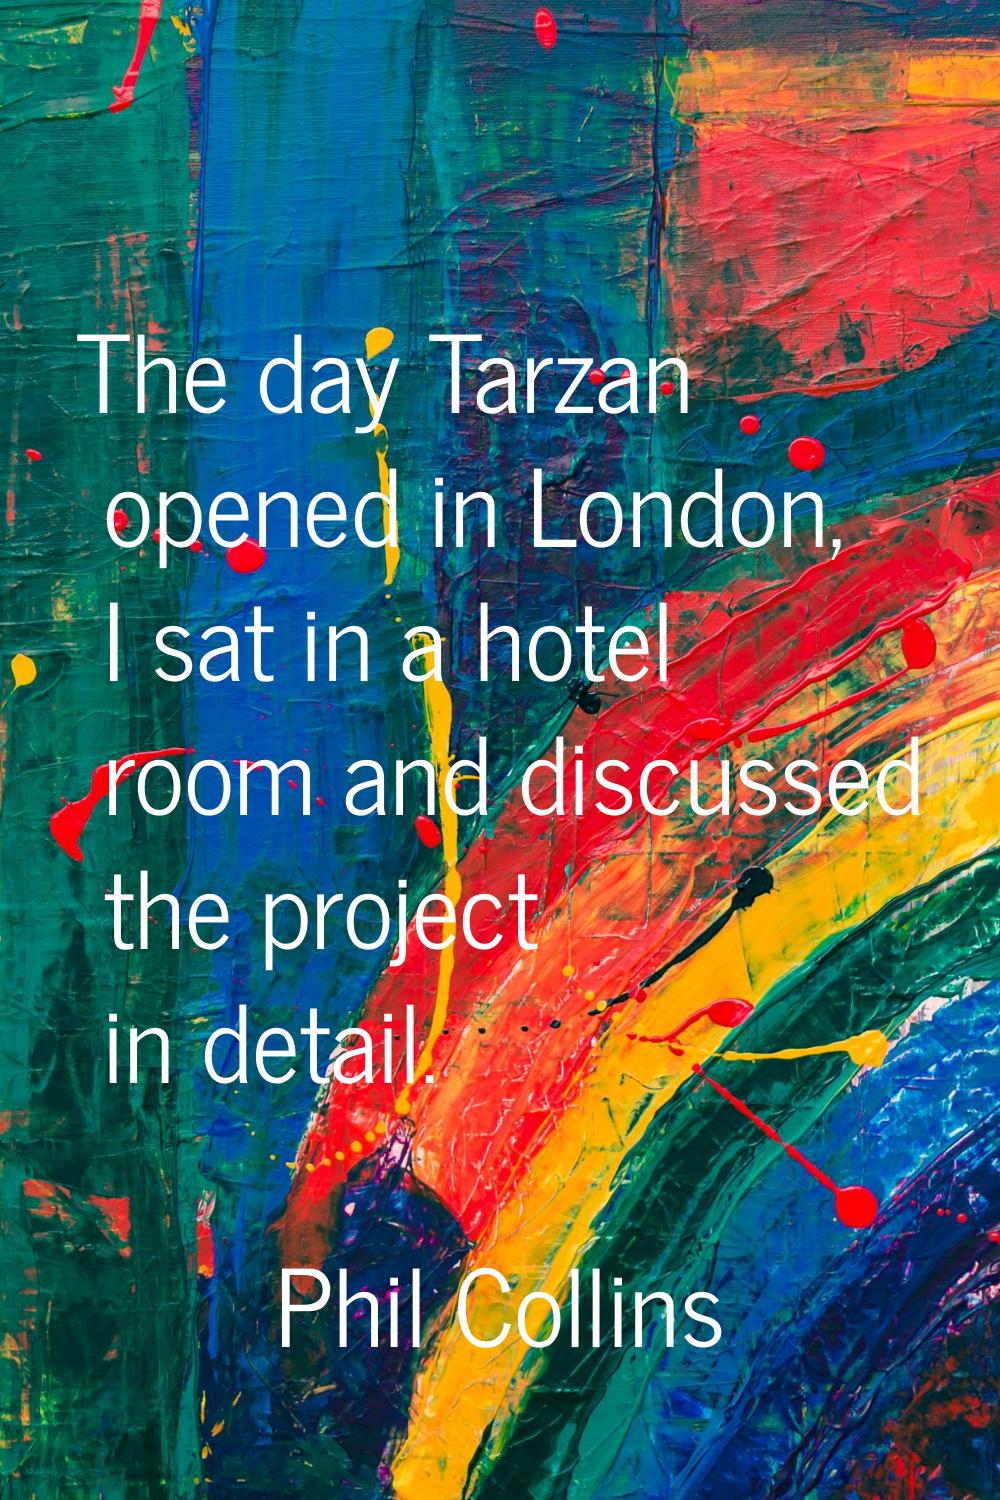 The day Tarzan opened in London, I sat in a hotel room and discussed the project in detail.